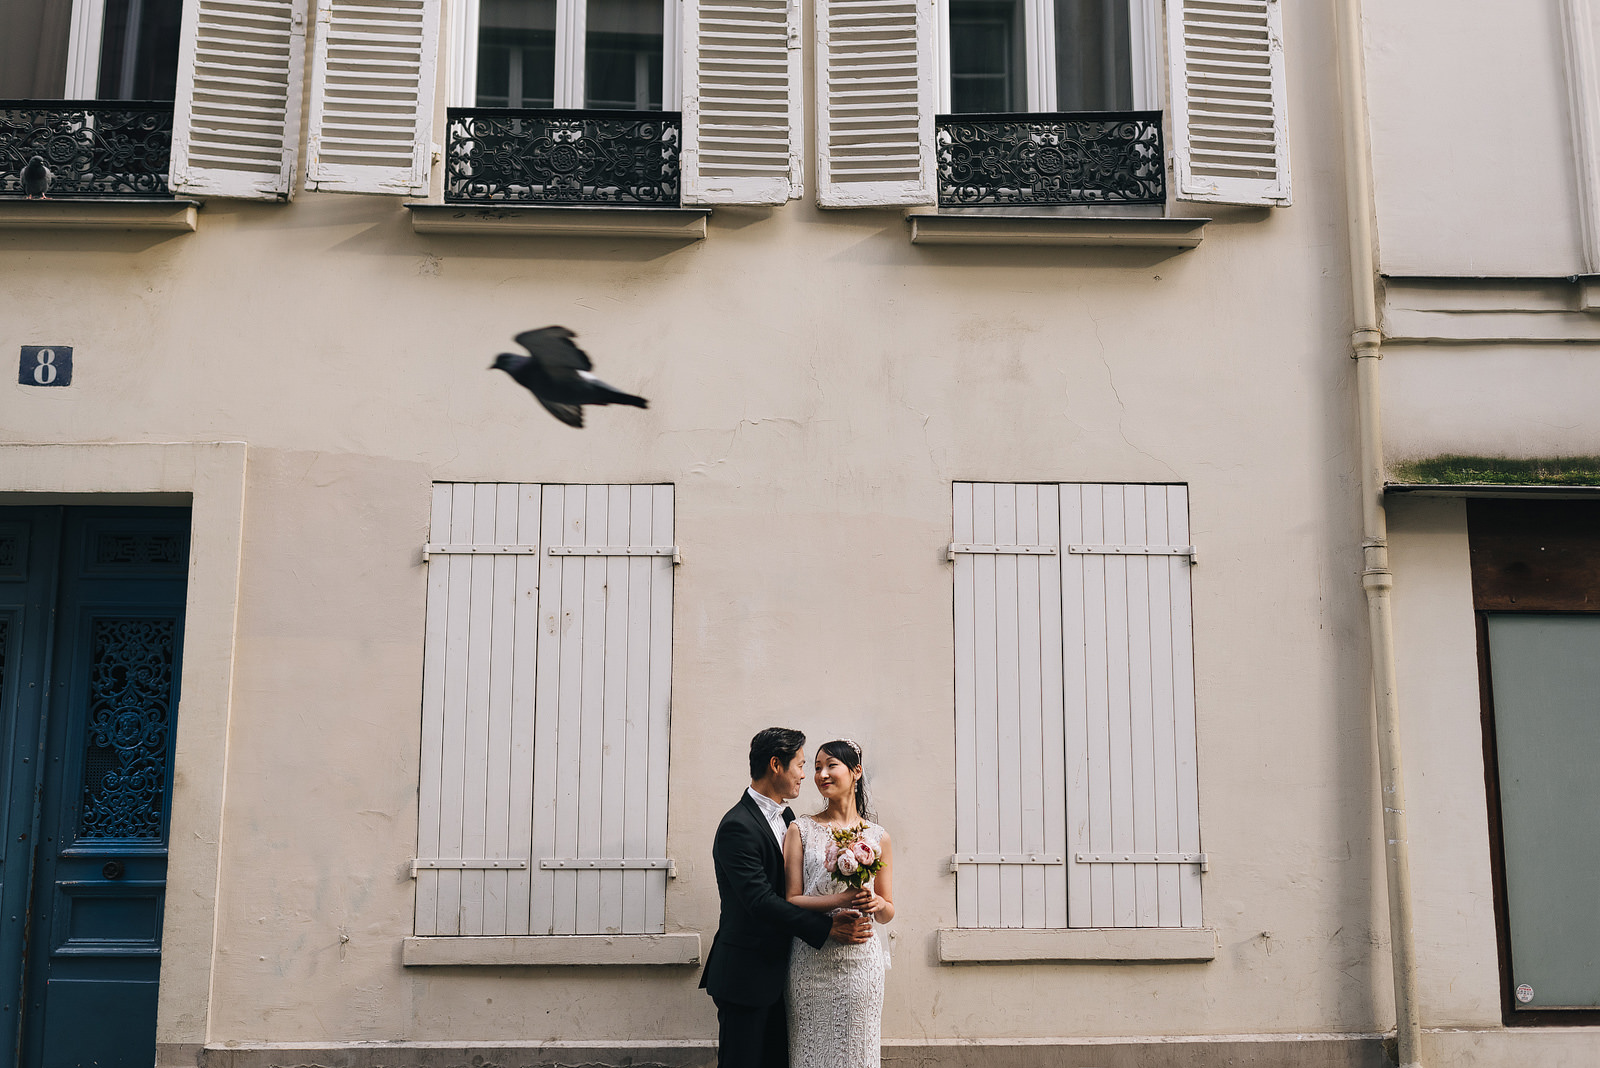 A pre-wedding shoot in the rustic back streets of Paris